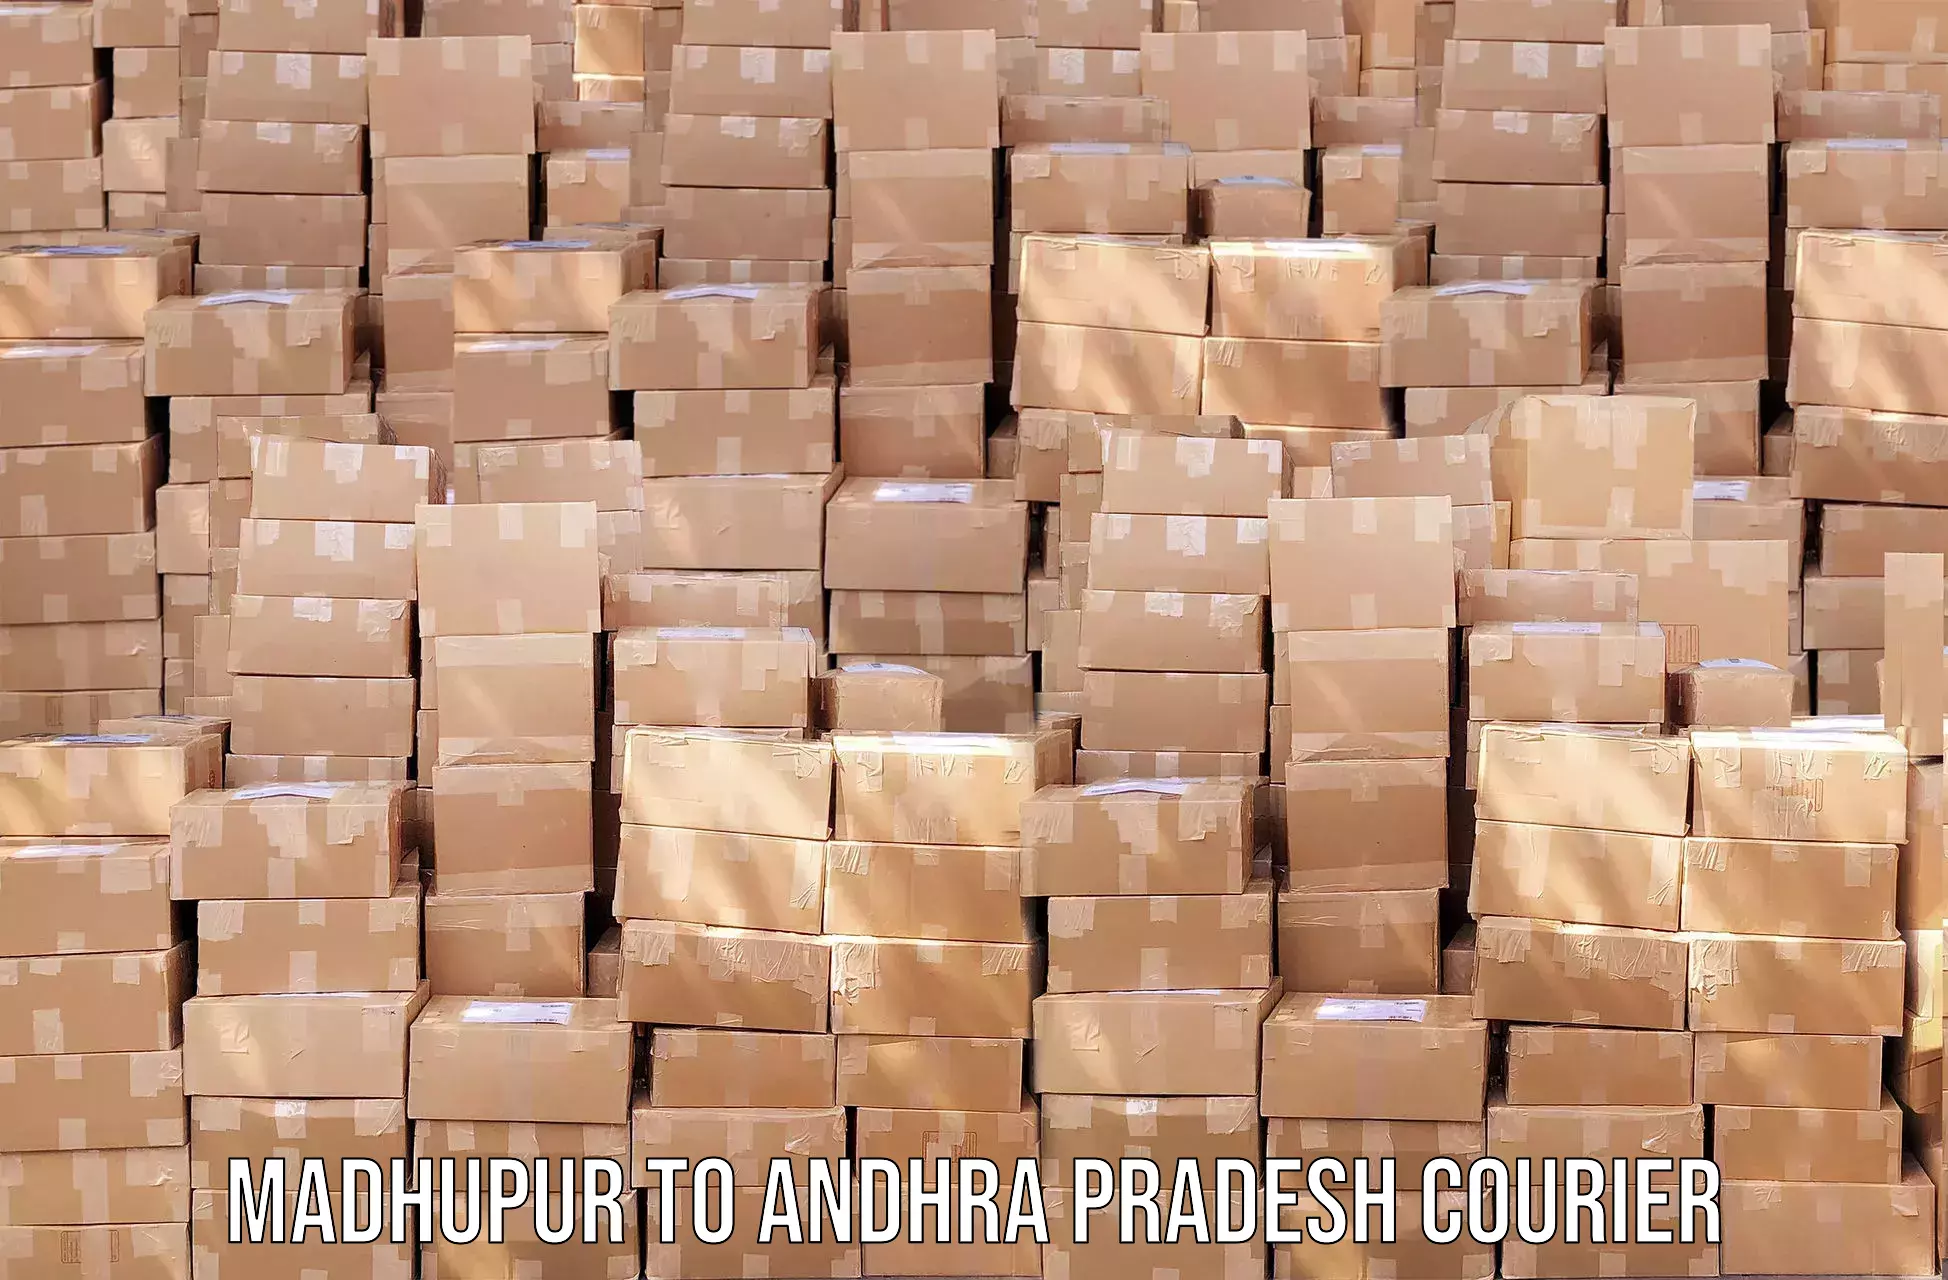 Next-day delivery options Madhupur to Eluru